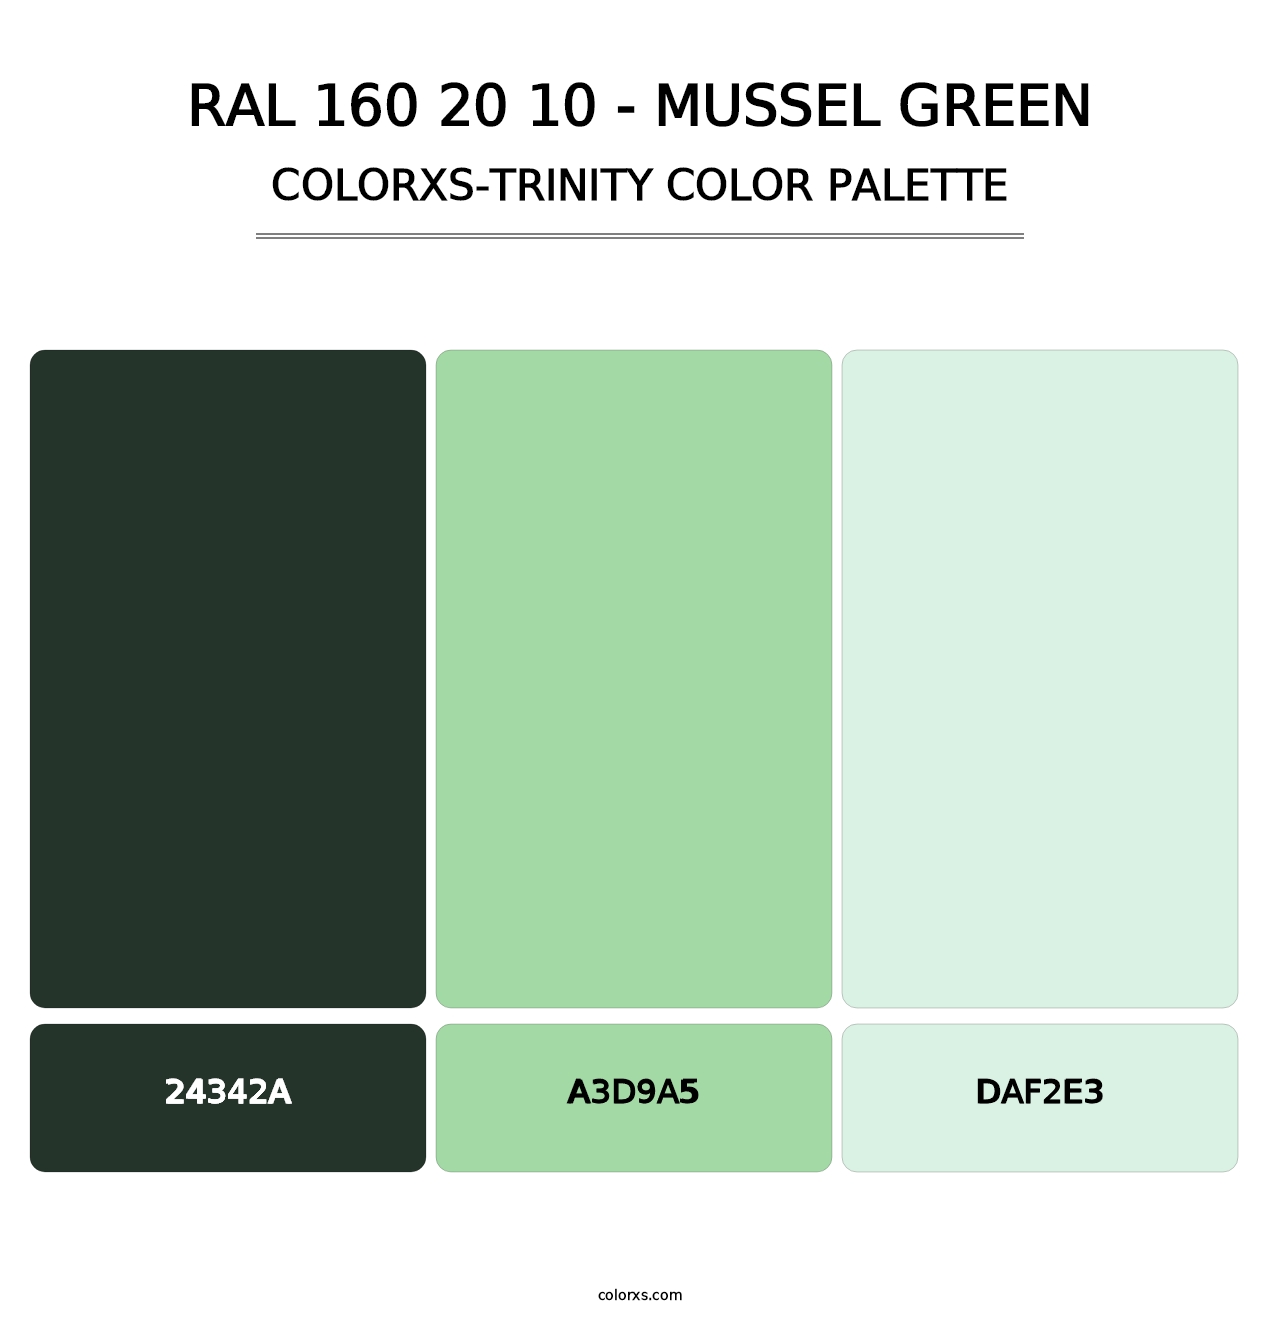 RAL 160 20 10 - Mussel Green - Colorxs Trinity Palette